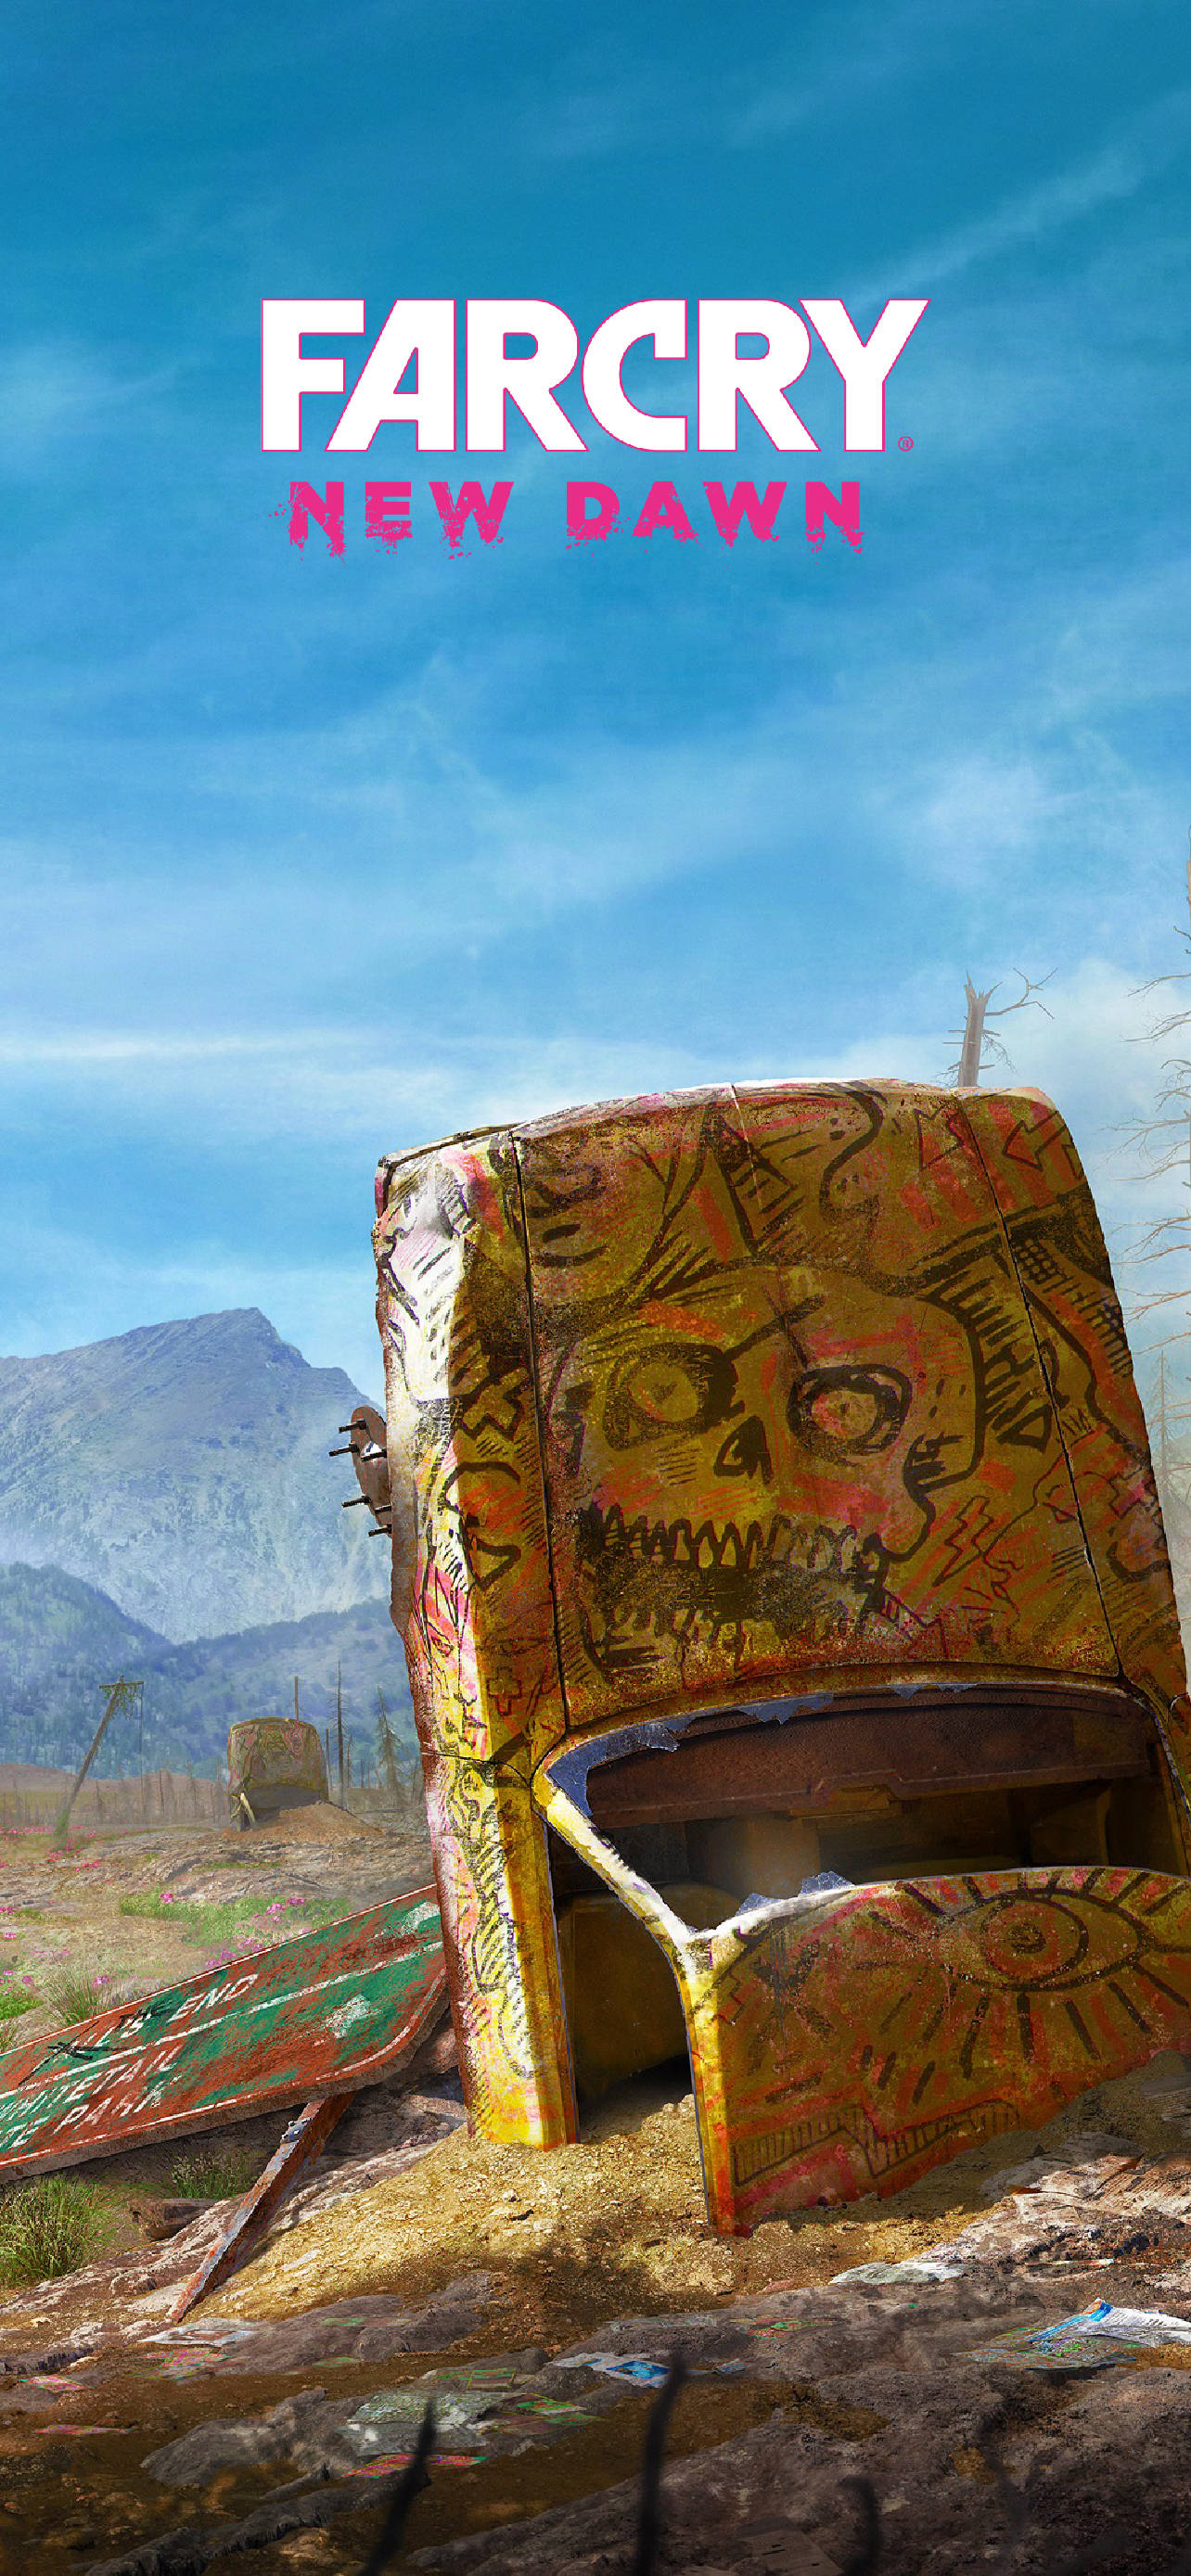 Download New Dawn Cover Far Cry Iphone Wallpaper 